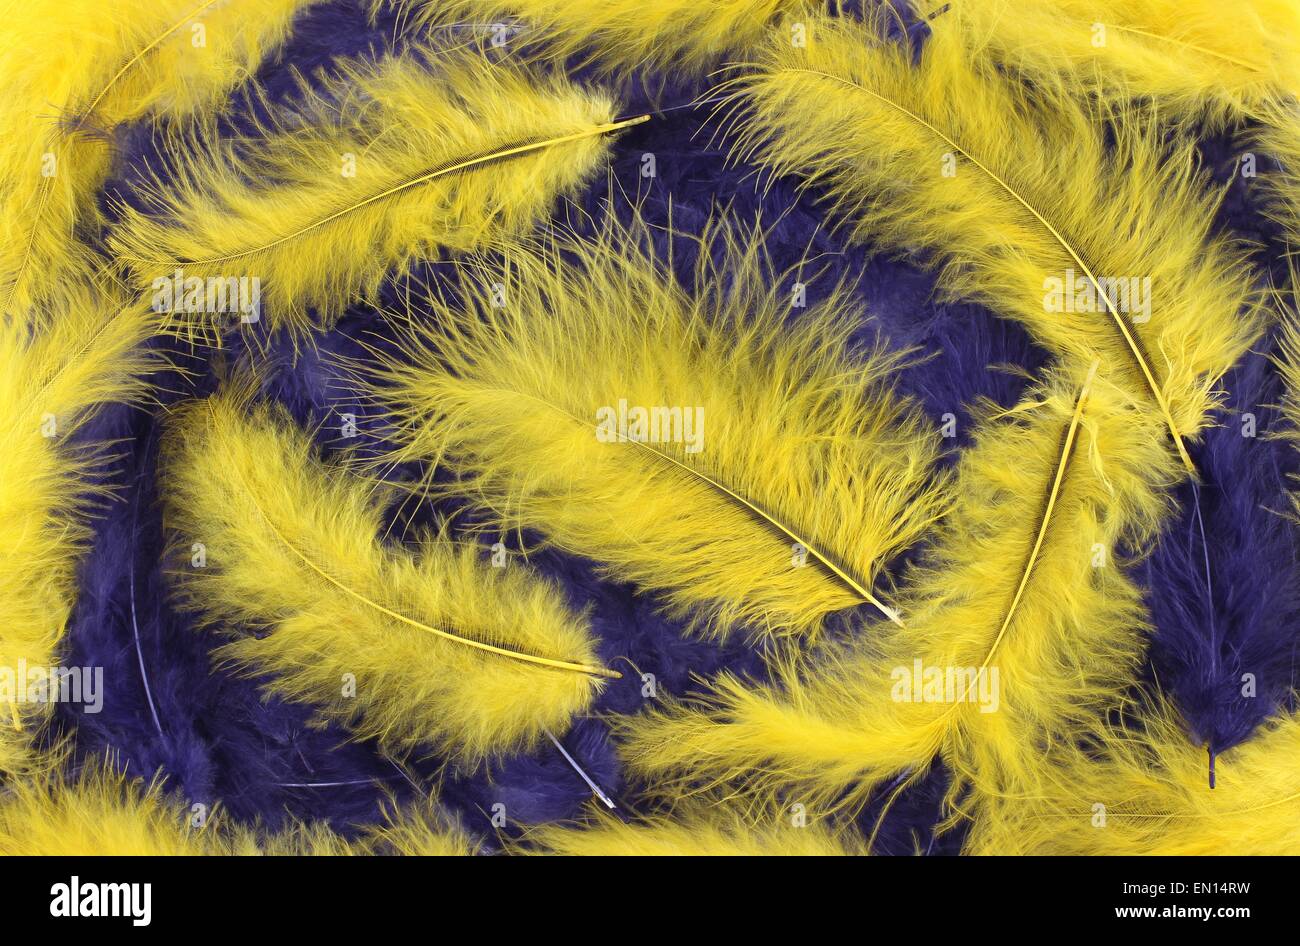 Blue and yellow plumes background Stock Photo